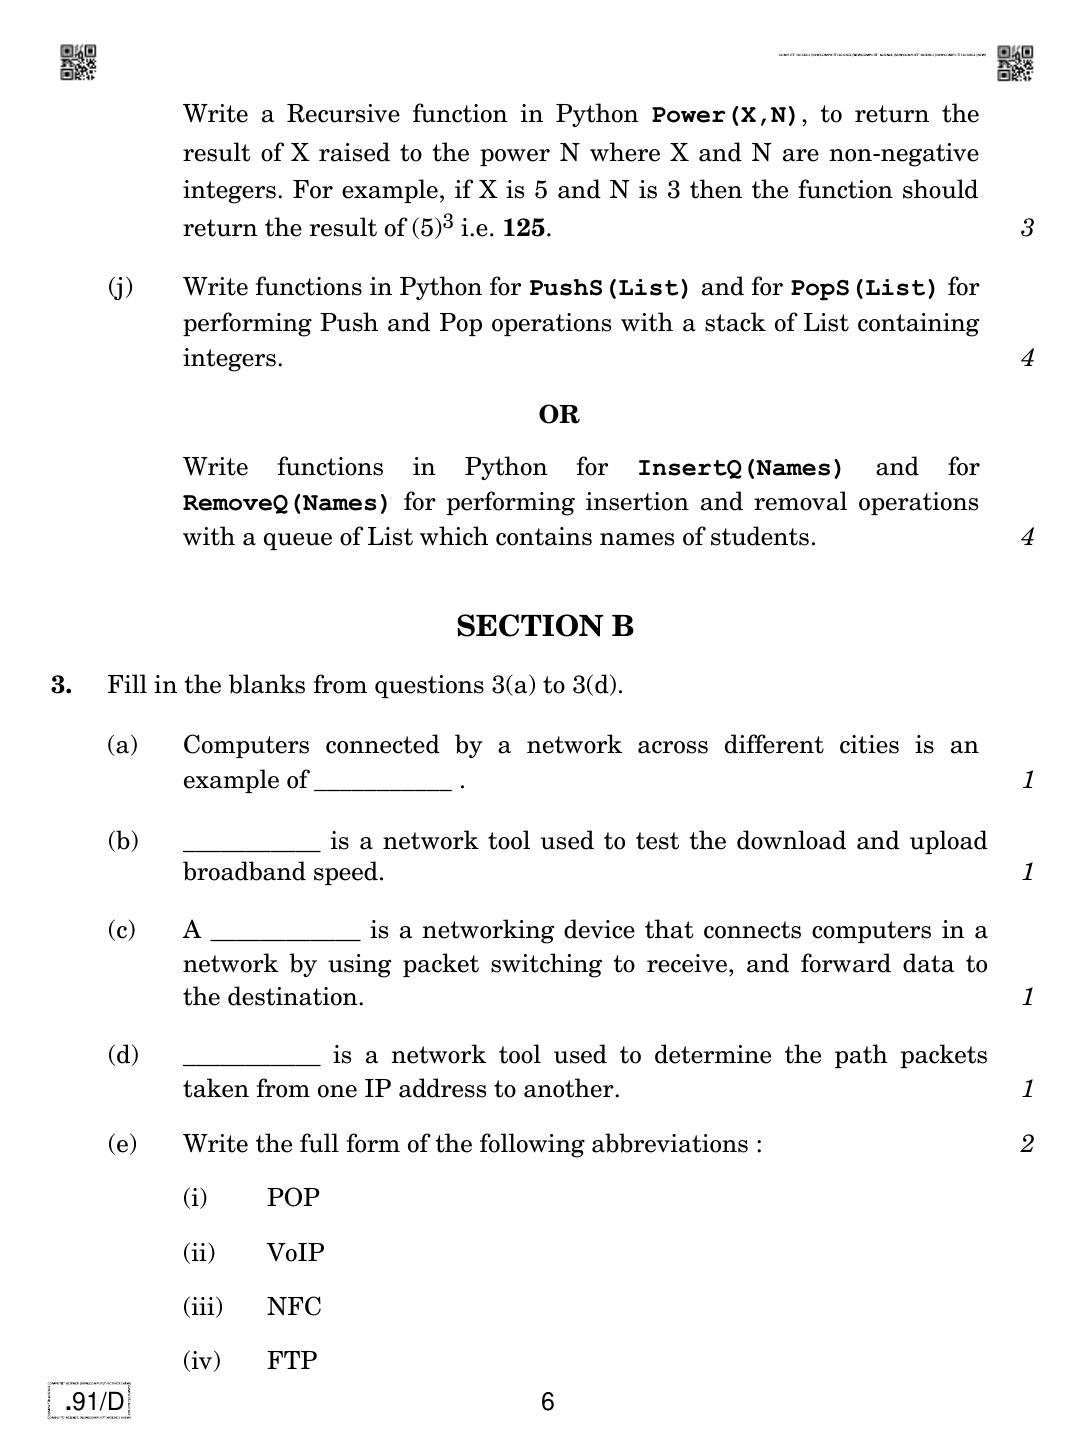 CBSE Class 12 CS 2020 Compartment Question Paper - Page 6